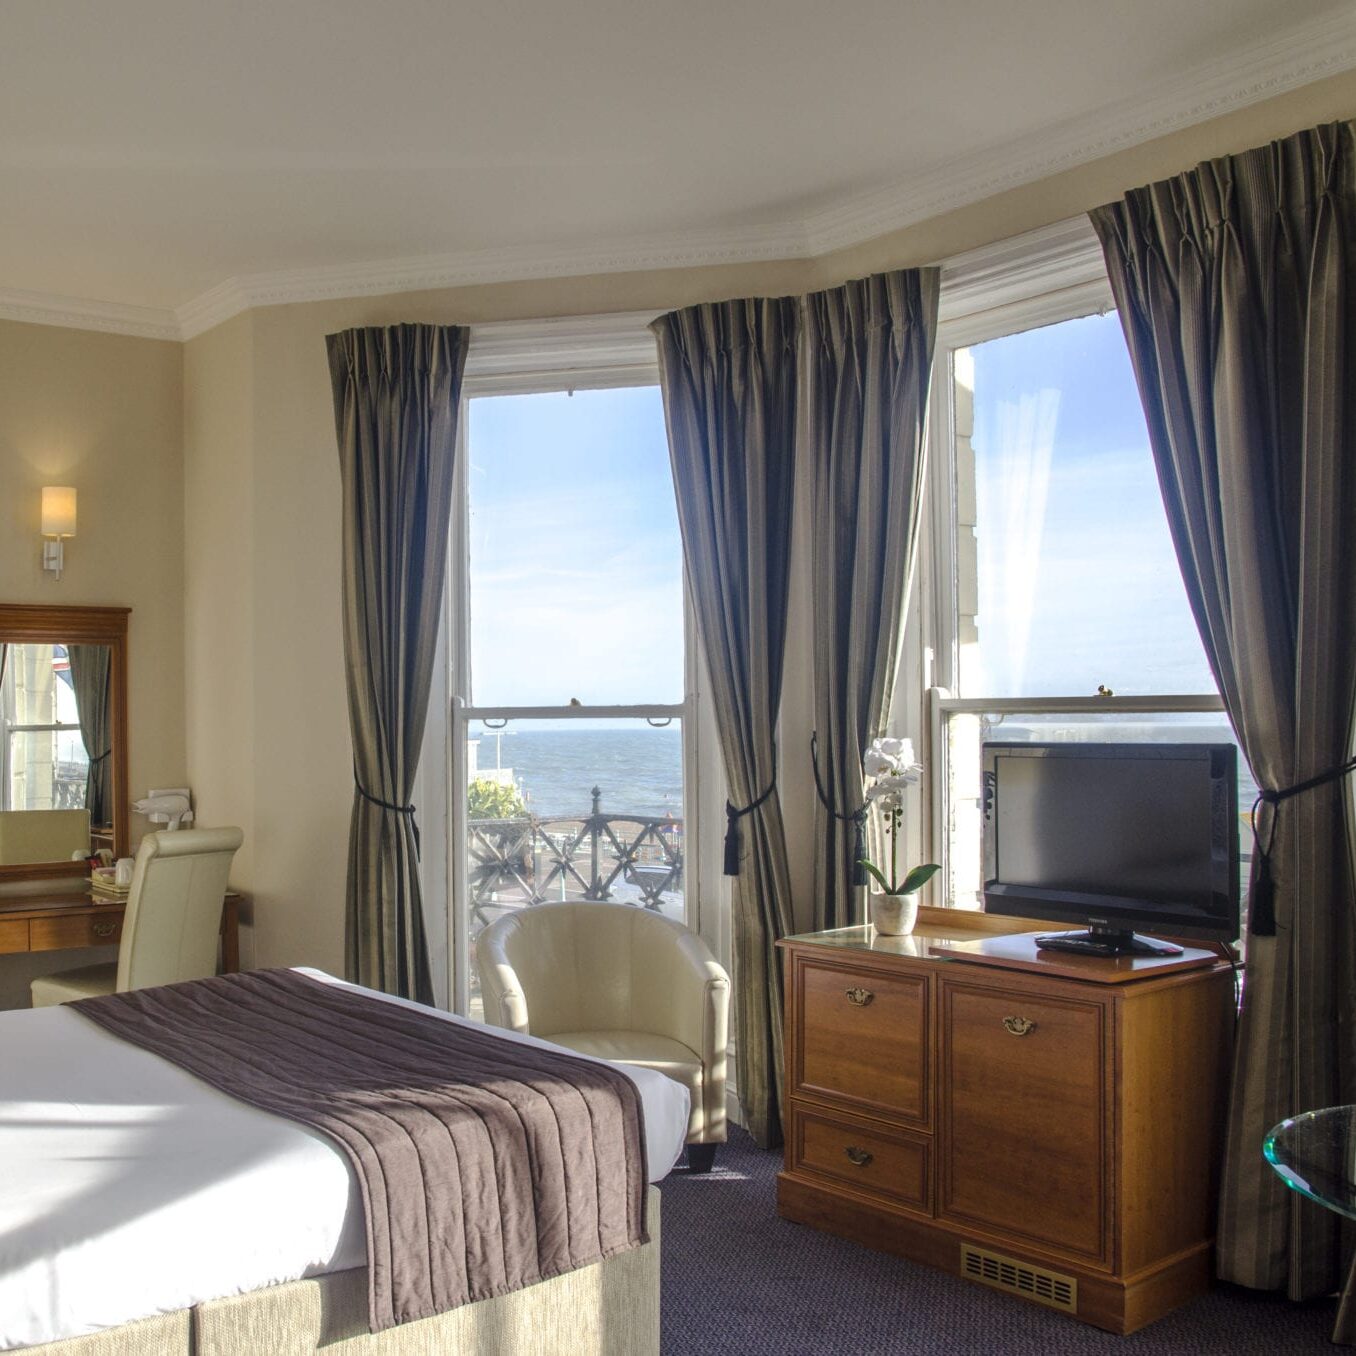 The Kings Hotel room, located by the seafront and furnished with a double bed, dressing table and television.